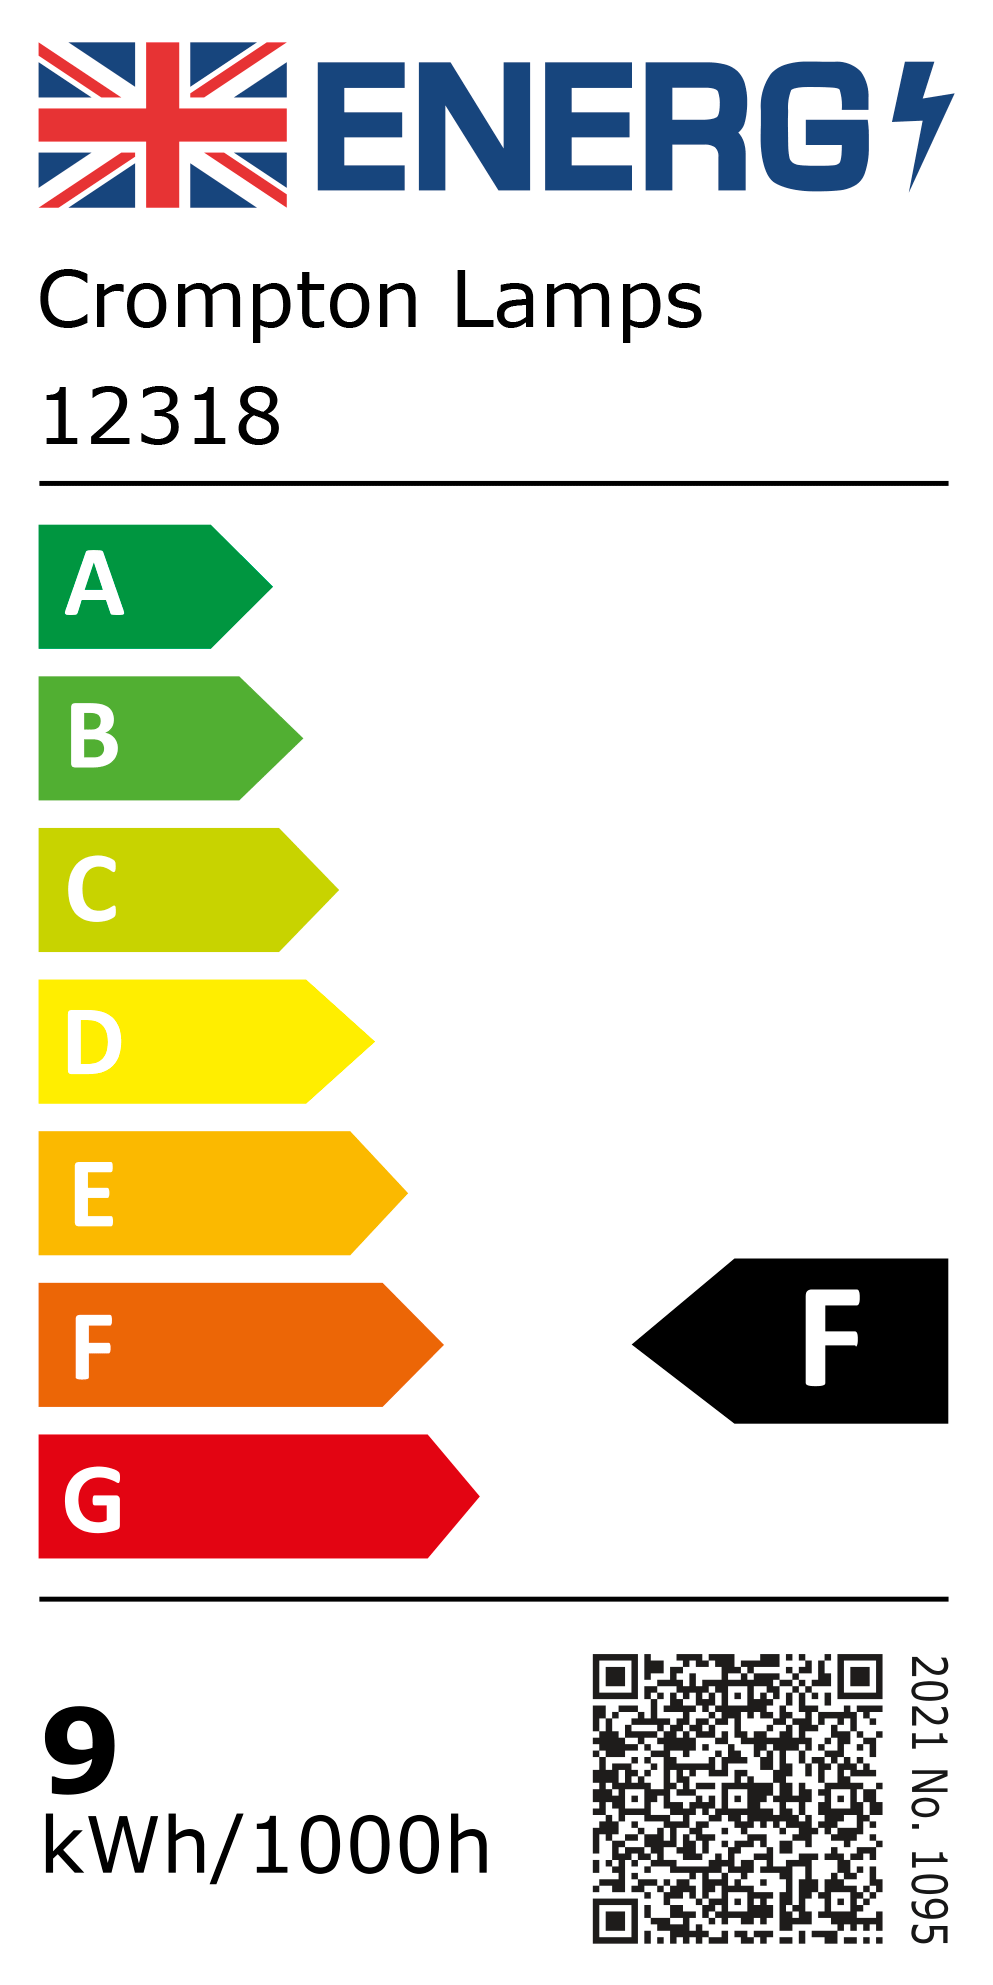 New 2021 Energy Rating Label: Stock Code 12318